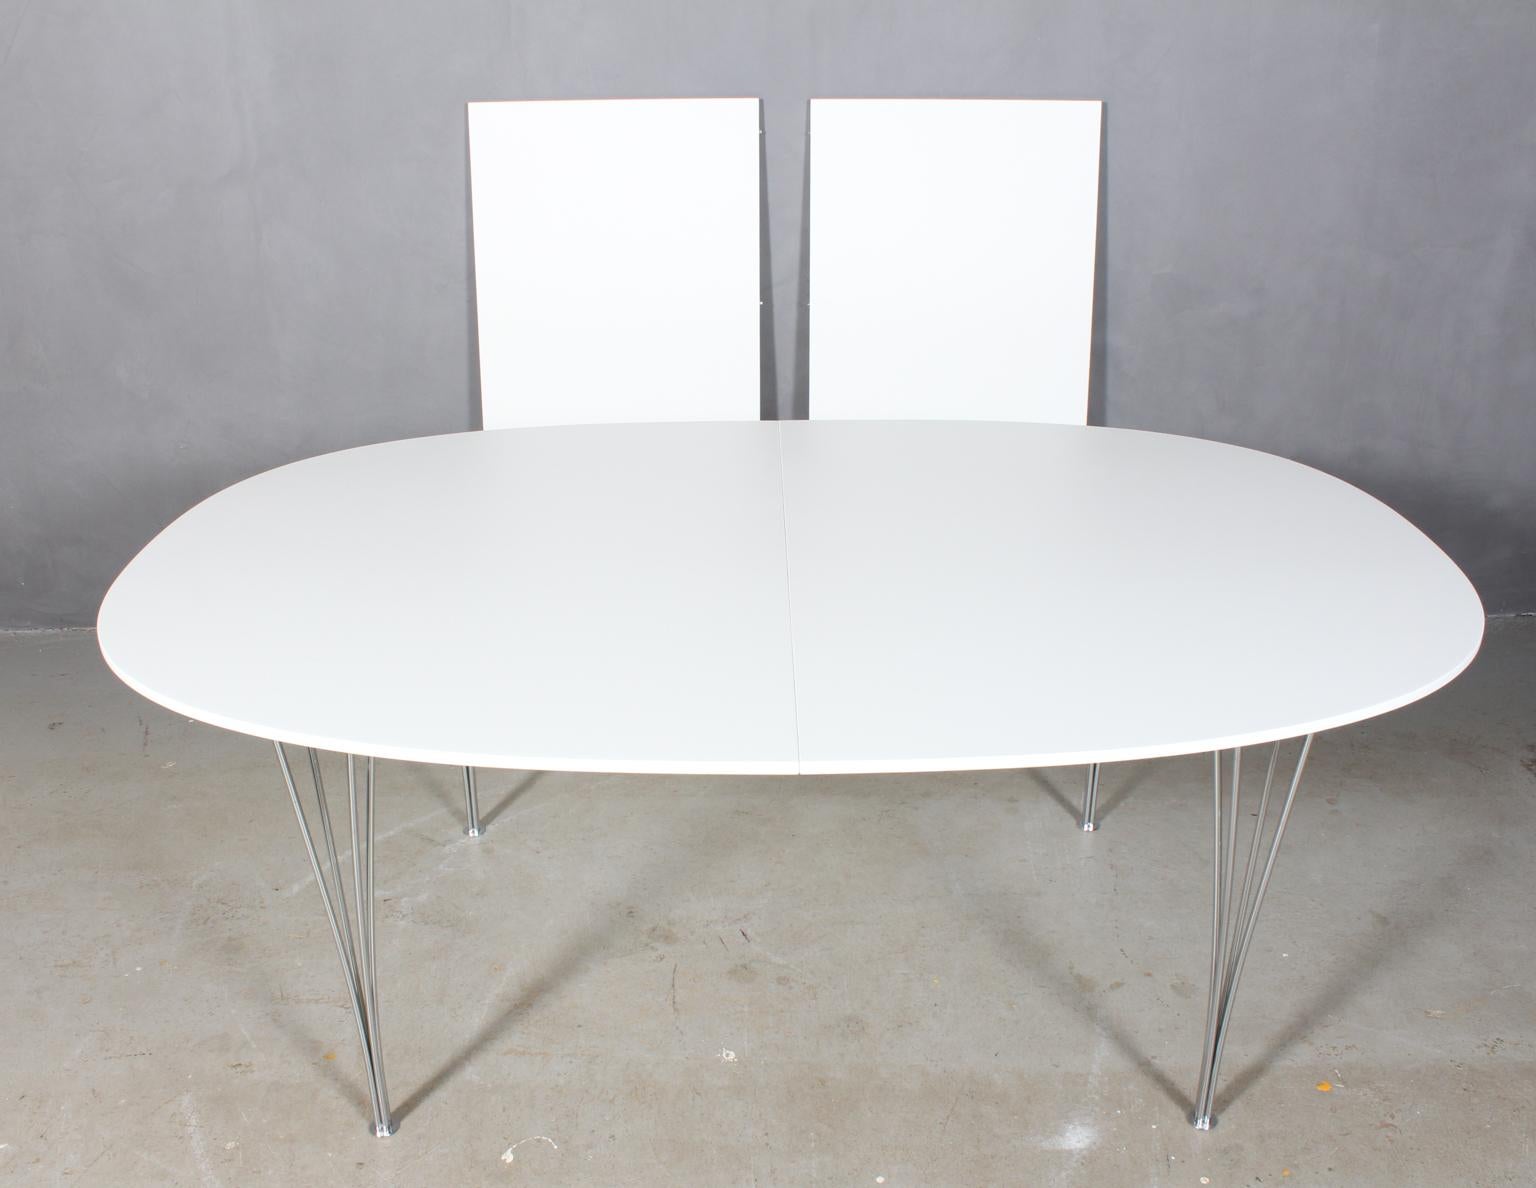 Piet Hein & Bruno Mathsson dining table with new professional lacquered white plate. 

Two Extension leaf of 60 cms.

Legs of chromed metal.

Model Super Elipse, made by Fritz Hansen.

This is one of the most iconic tables in Scandinavia.